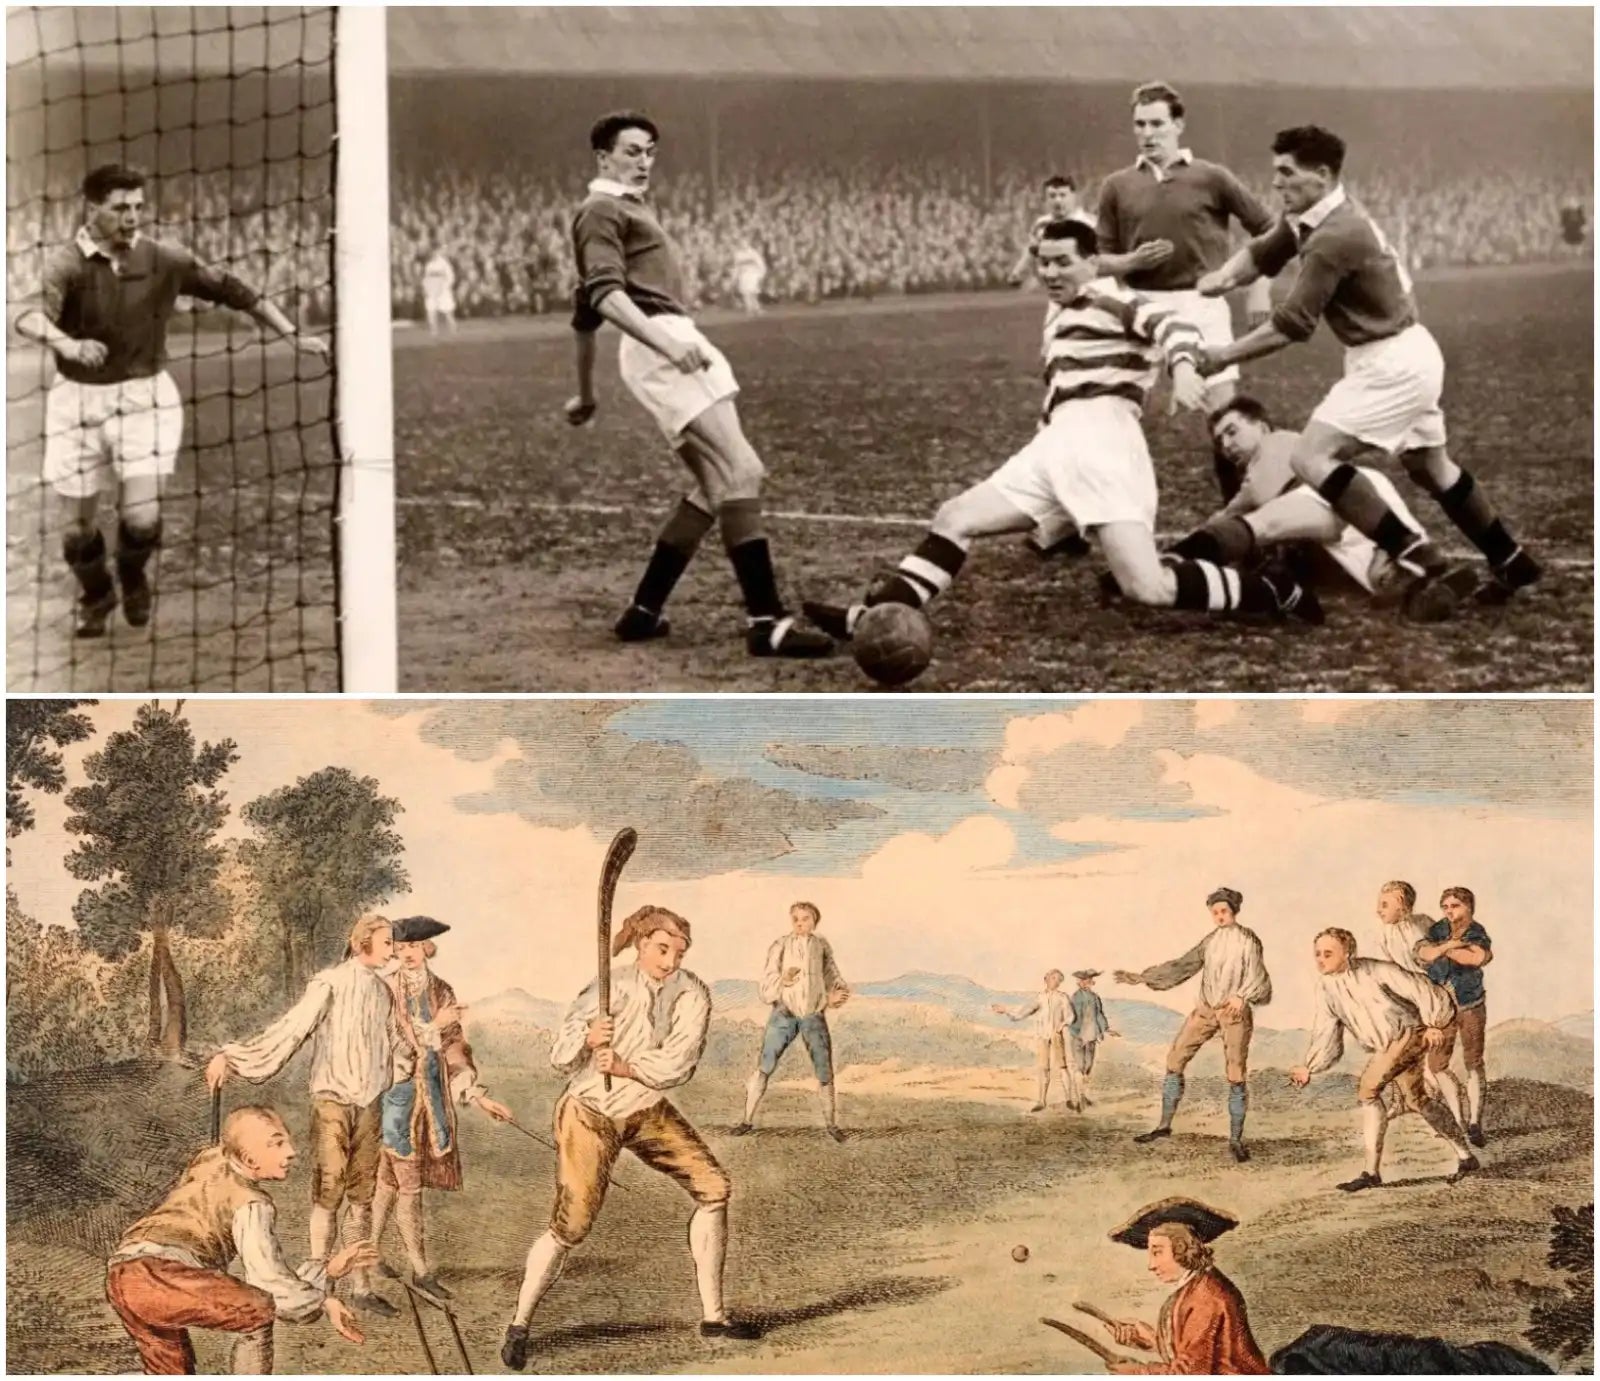 A Collage of two images: A black and white image of players playing football in older times and a drawing illustration of players playing village cricket in older times